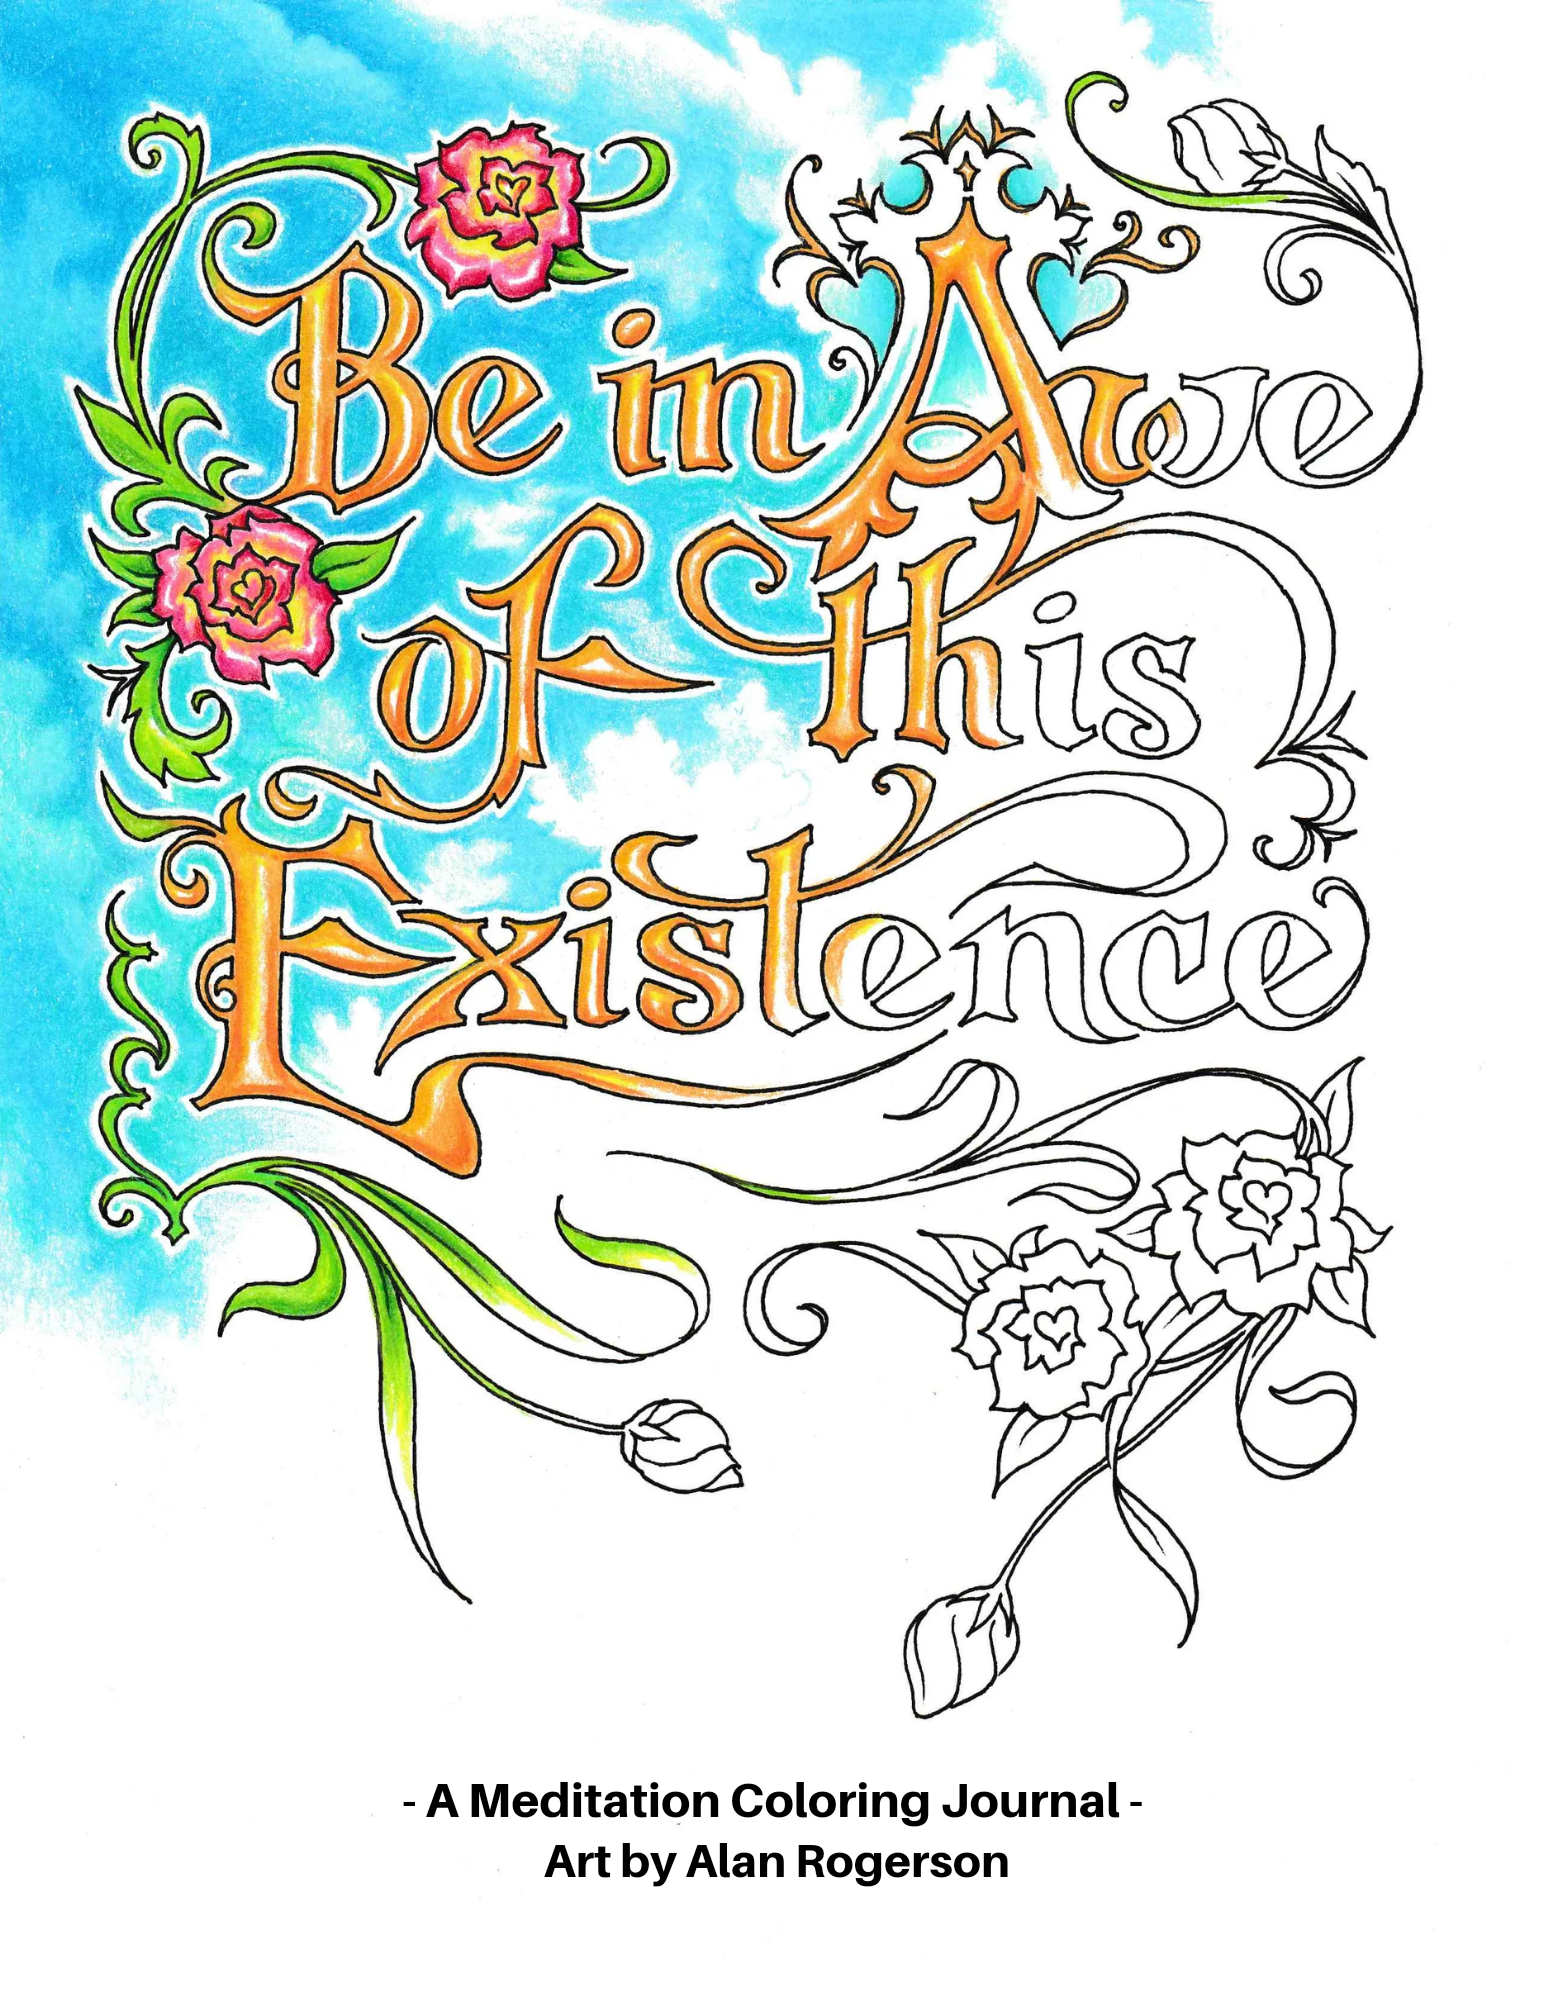 Be in Awe of this Existence - Coloring Journal 